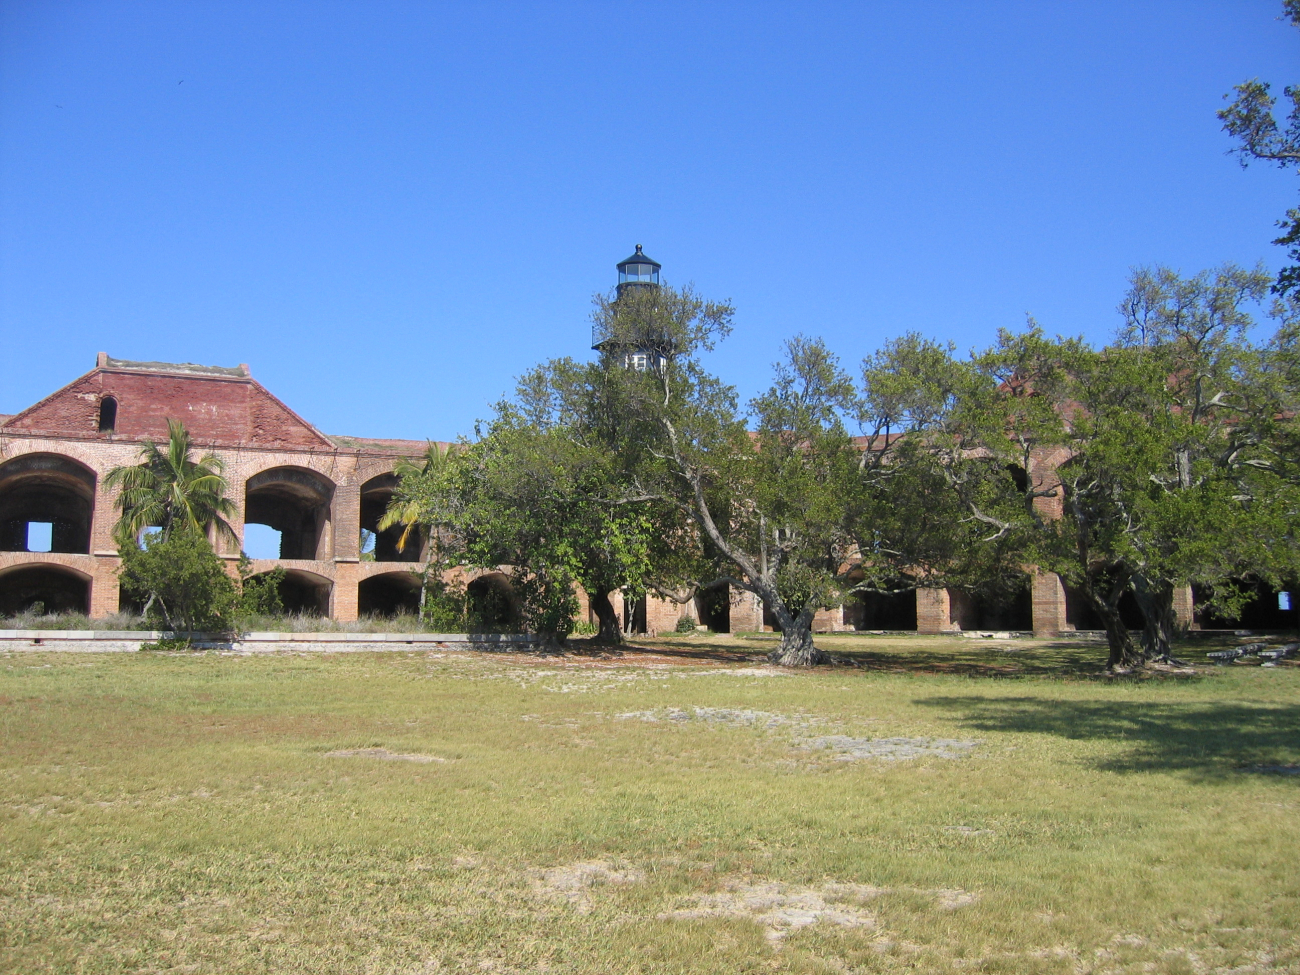 On the Fort Jefferson parade ground